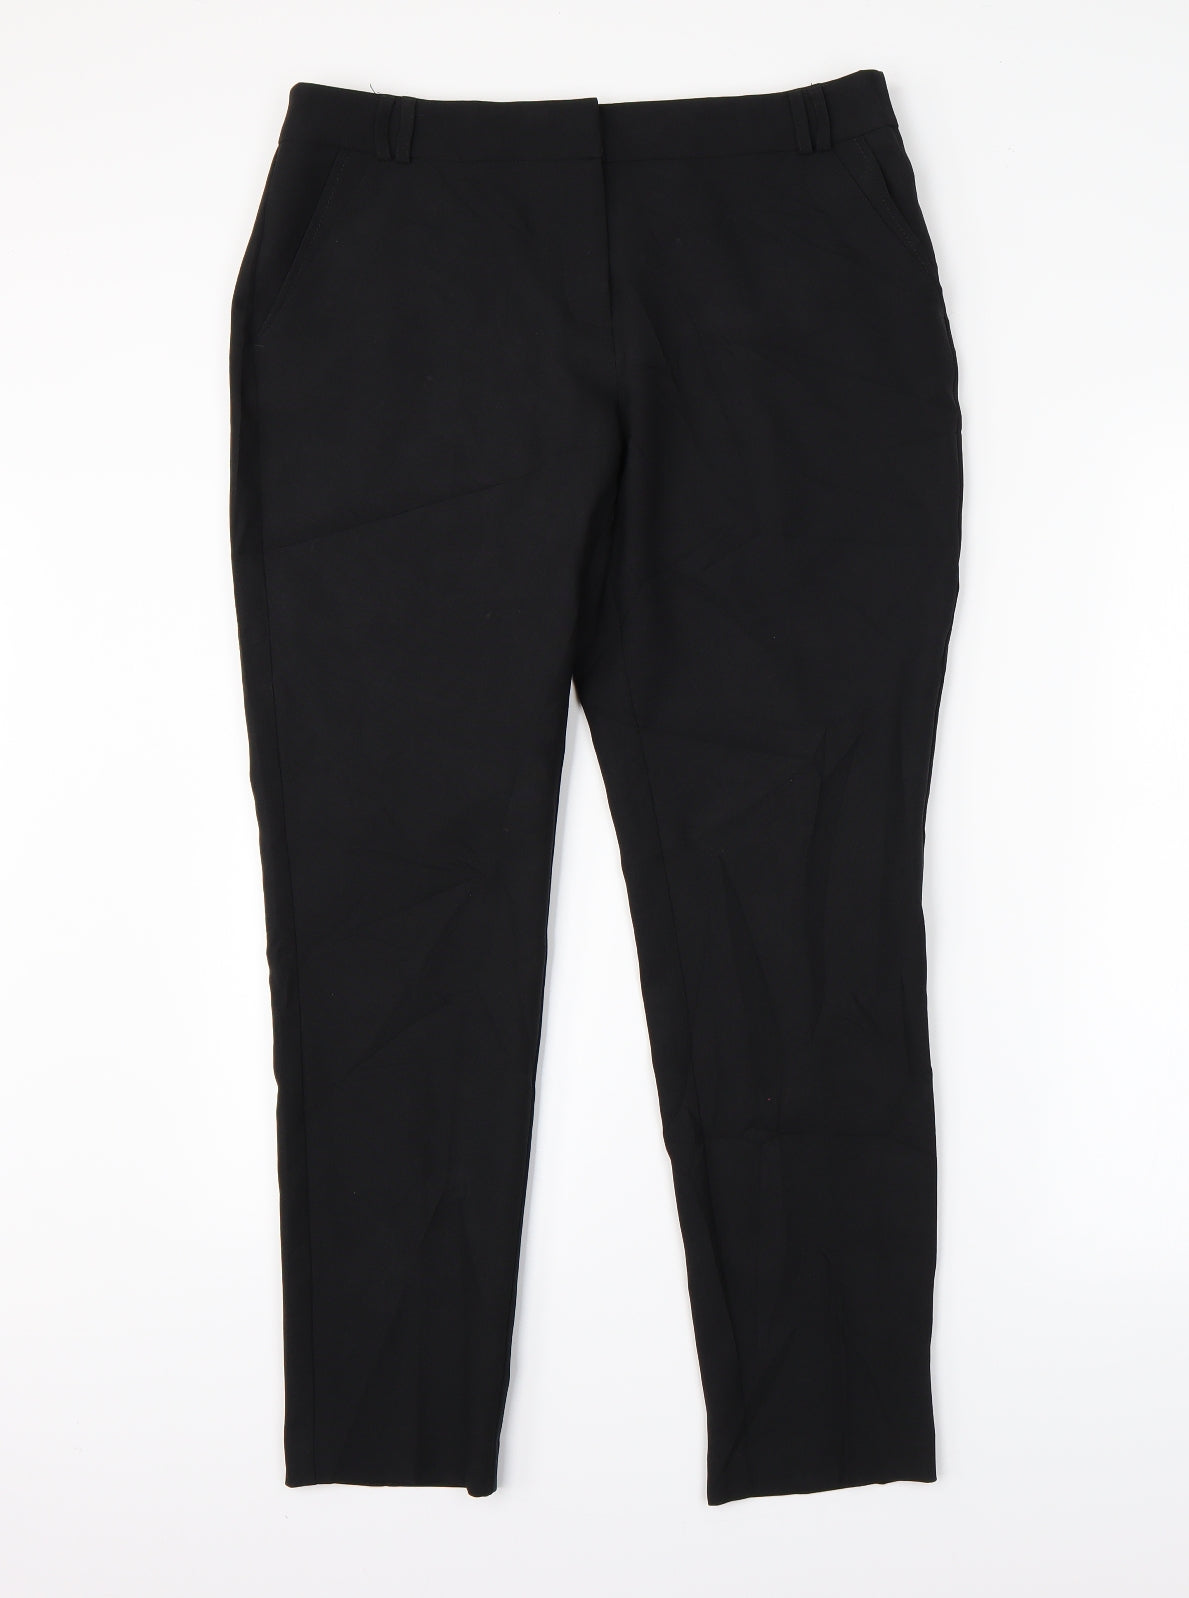 Atmosphere Womens Black Trouser Suit Suit Trousers Size 12 L28 in